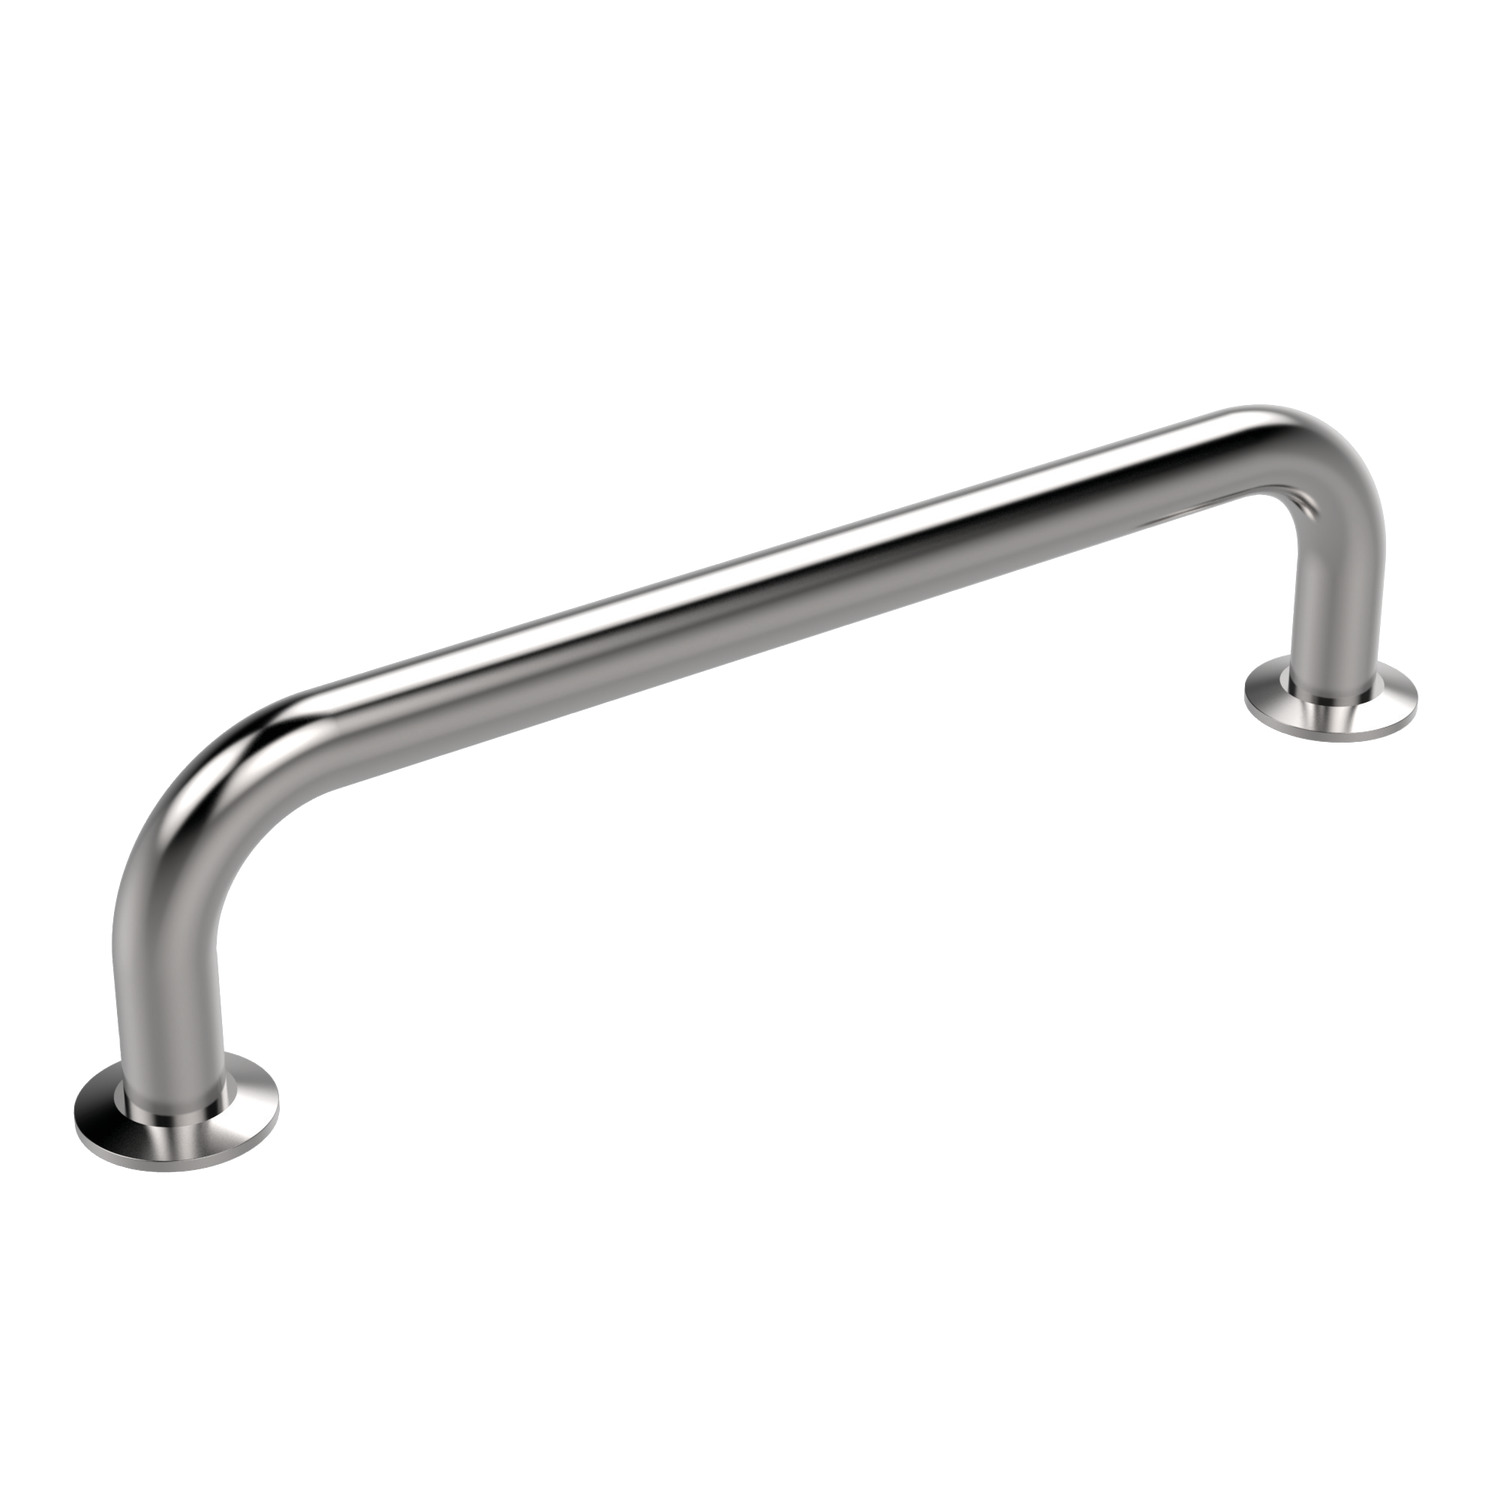 Product 78700, Pull Handles steel / 